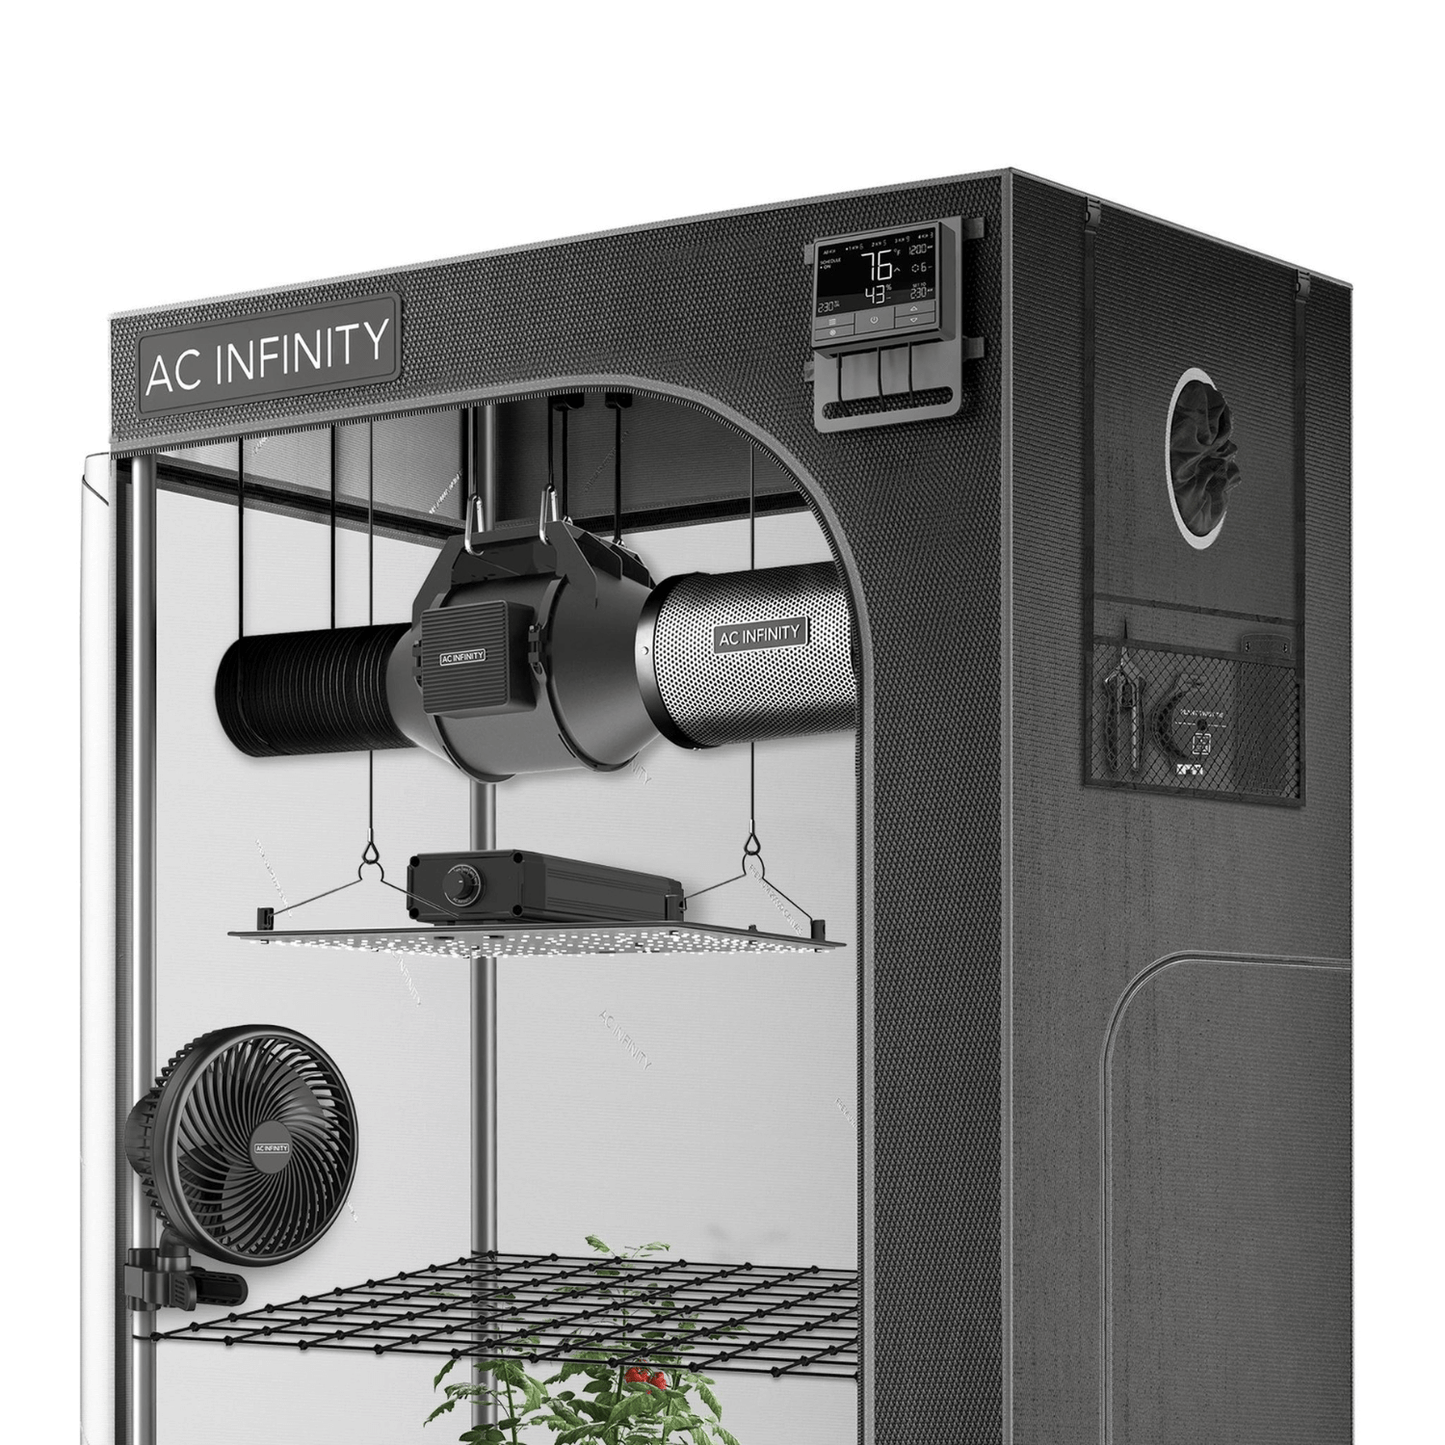 AC Infinity Advance Grow Tent System 3x3, 3-Plant Kit, Integrated Smart Controls to Automate Ventilation, Circulation, Full Spectrum LED Grow Light AC-PKB33 Kits 819137022850